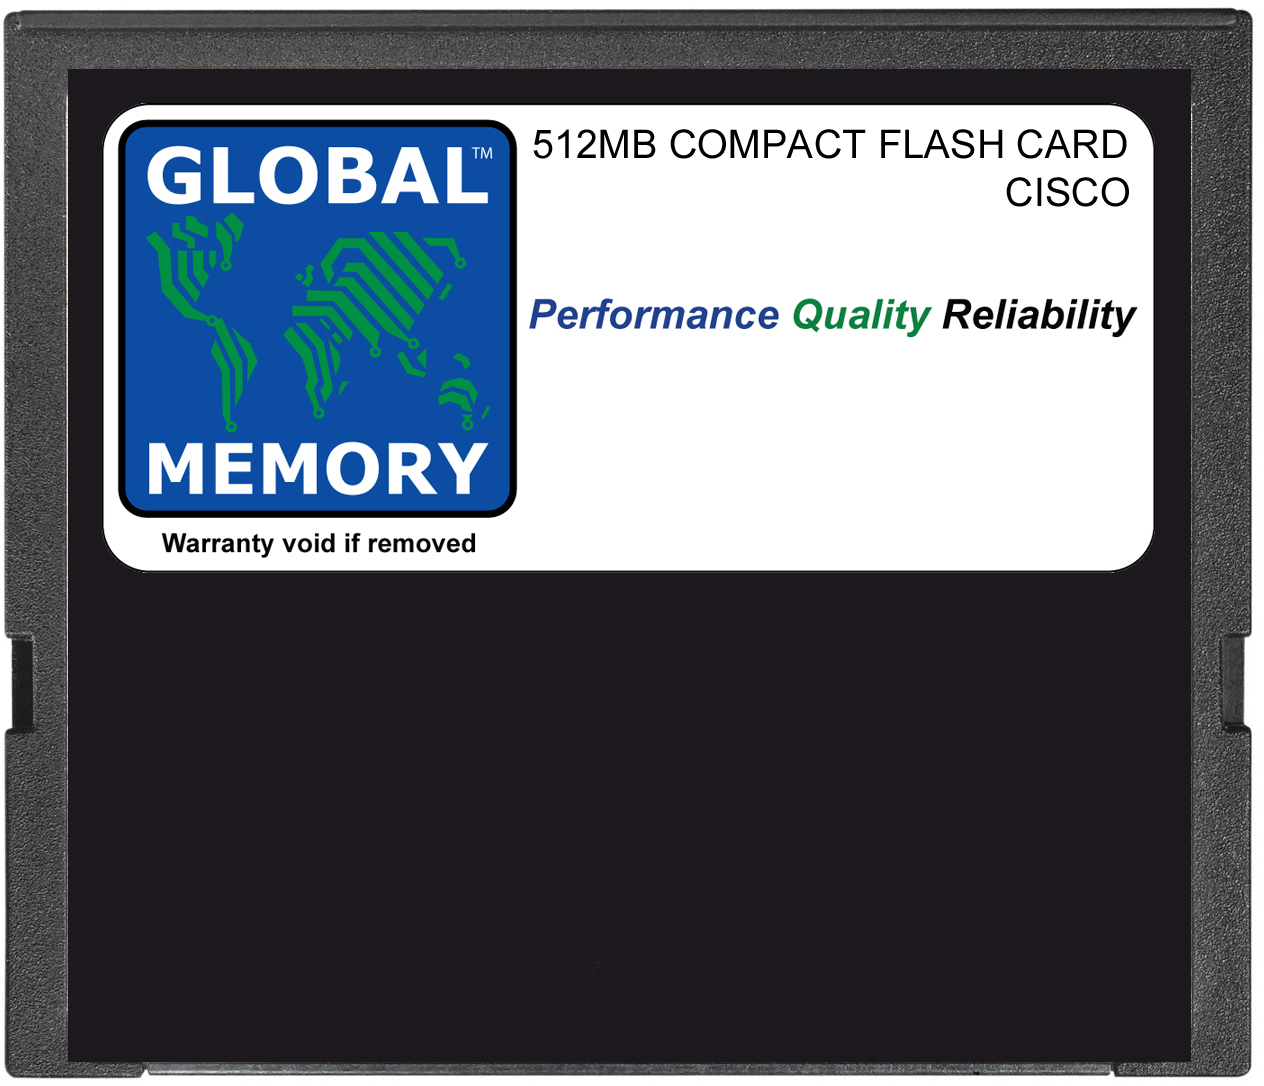 512MB COMPACT FLASH CARD MEMORY FOR CISCO CATALYST 6500 SERIES SWITCHES & 7600 SERIES ROUTERS 720 RSP (MEM-C6K-CPTFL512M) - Click Image to Close